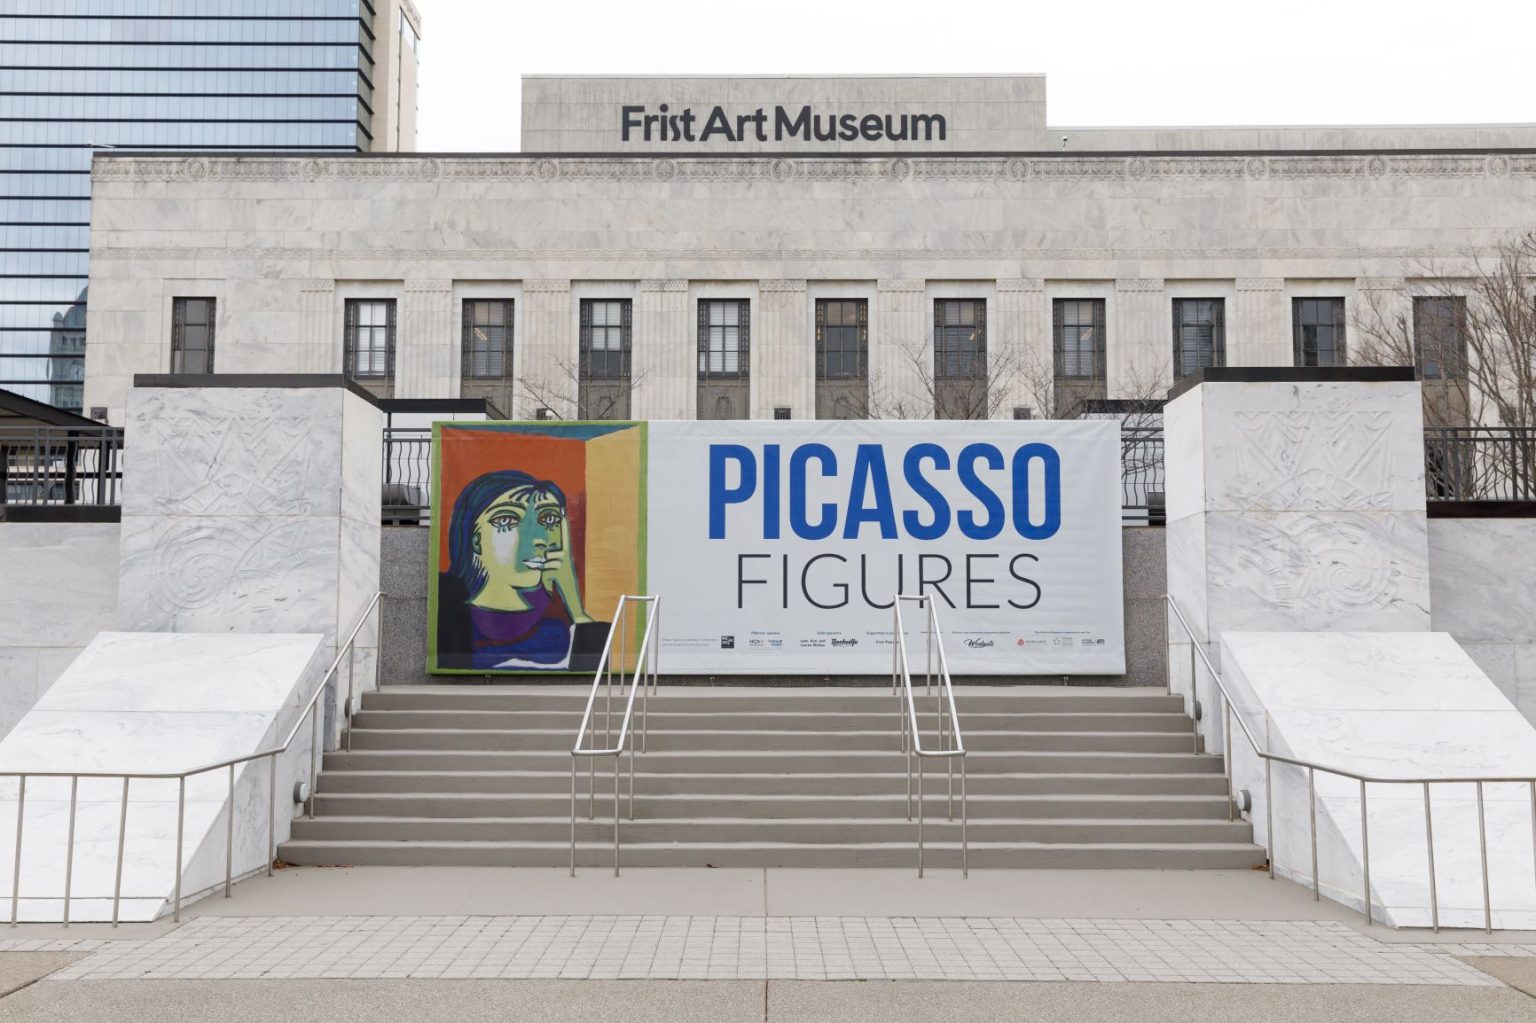 Picasso Exhibition Extended One Week at Frist Art Museum